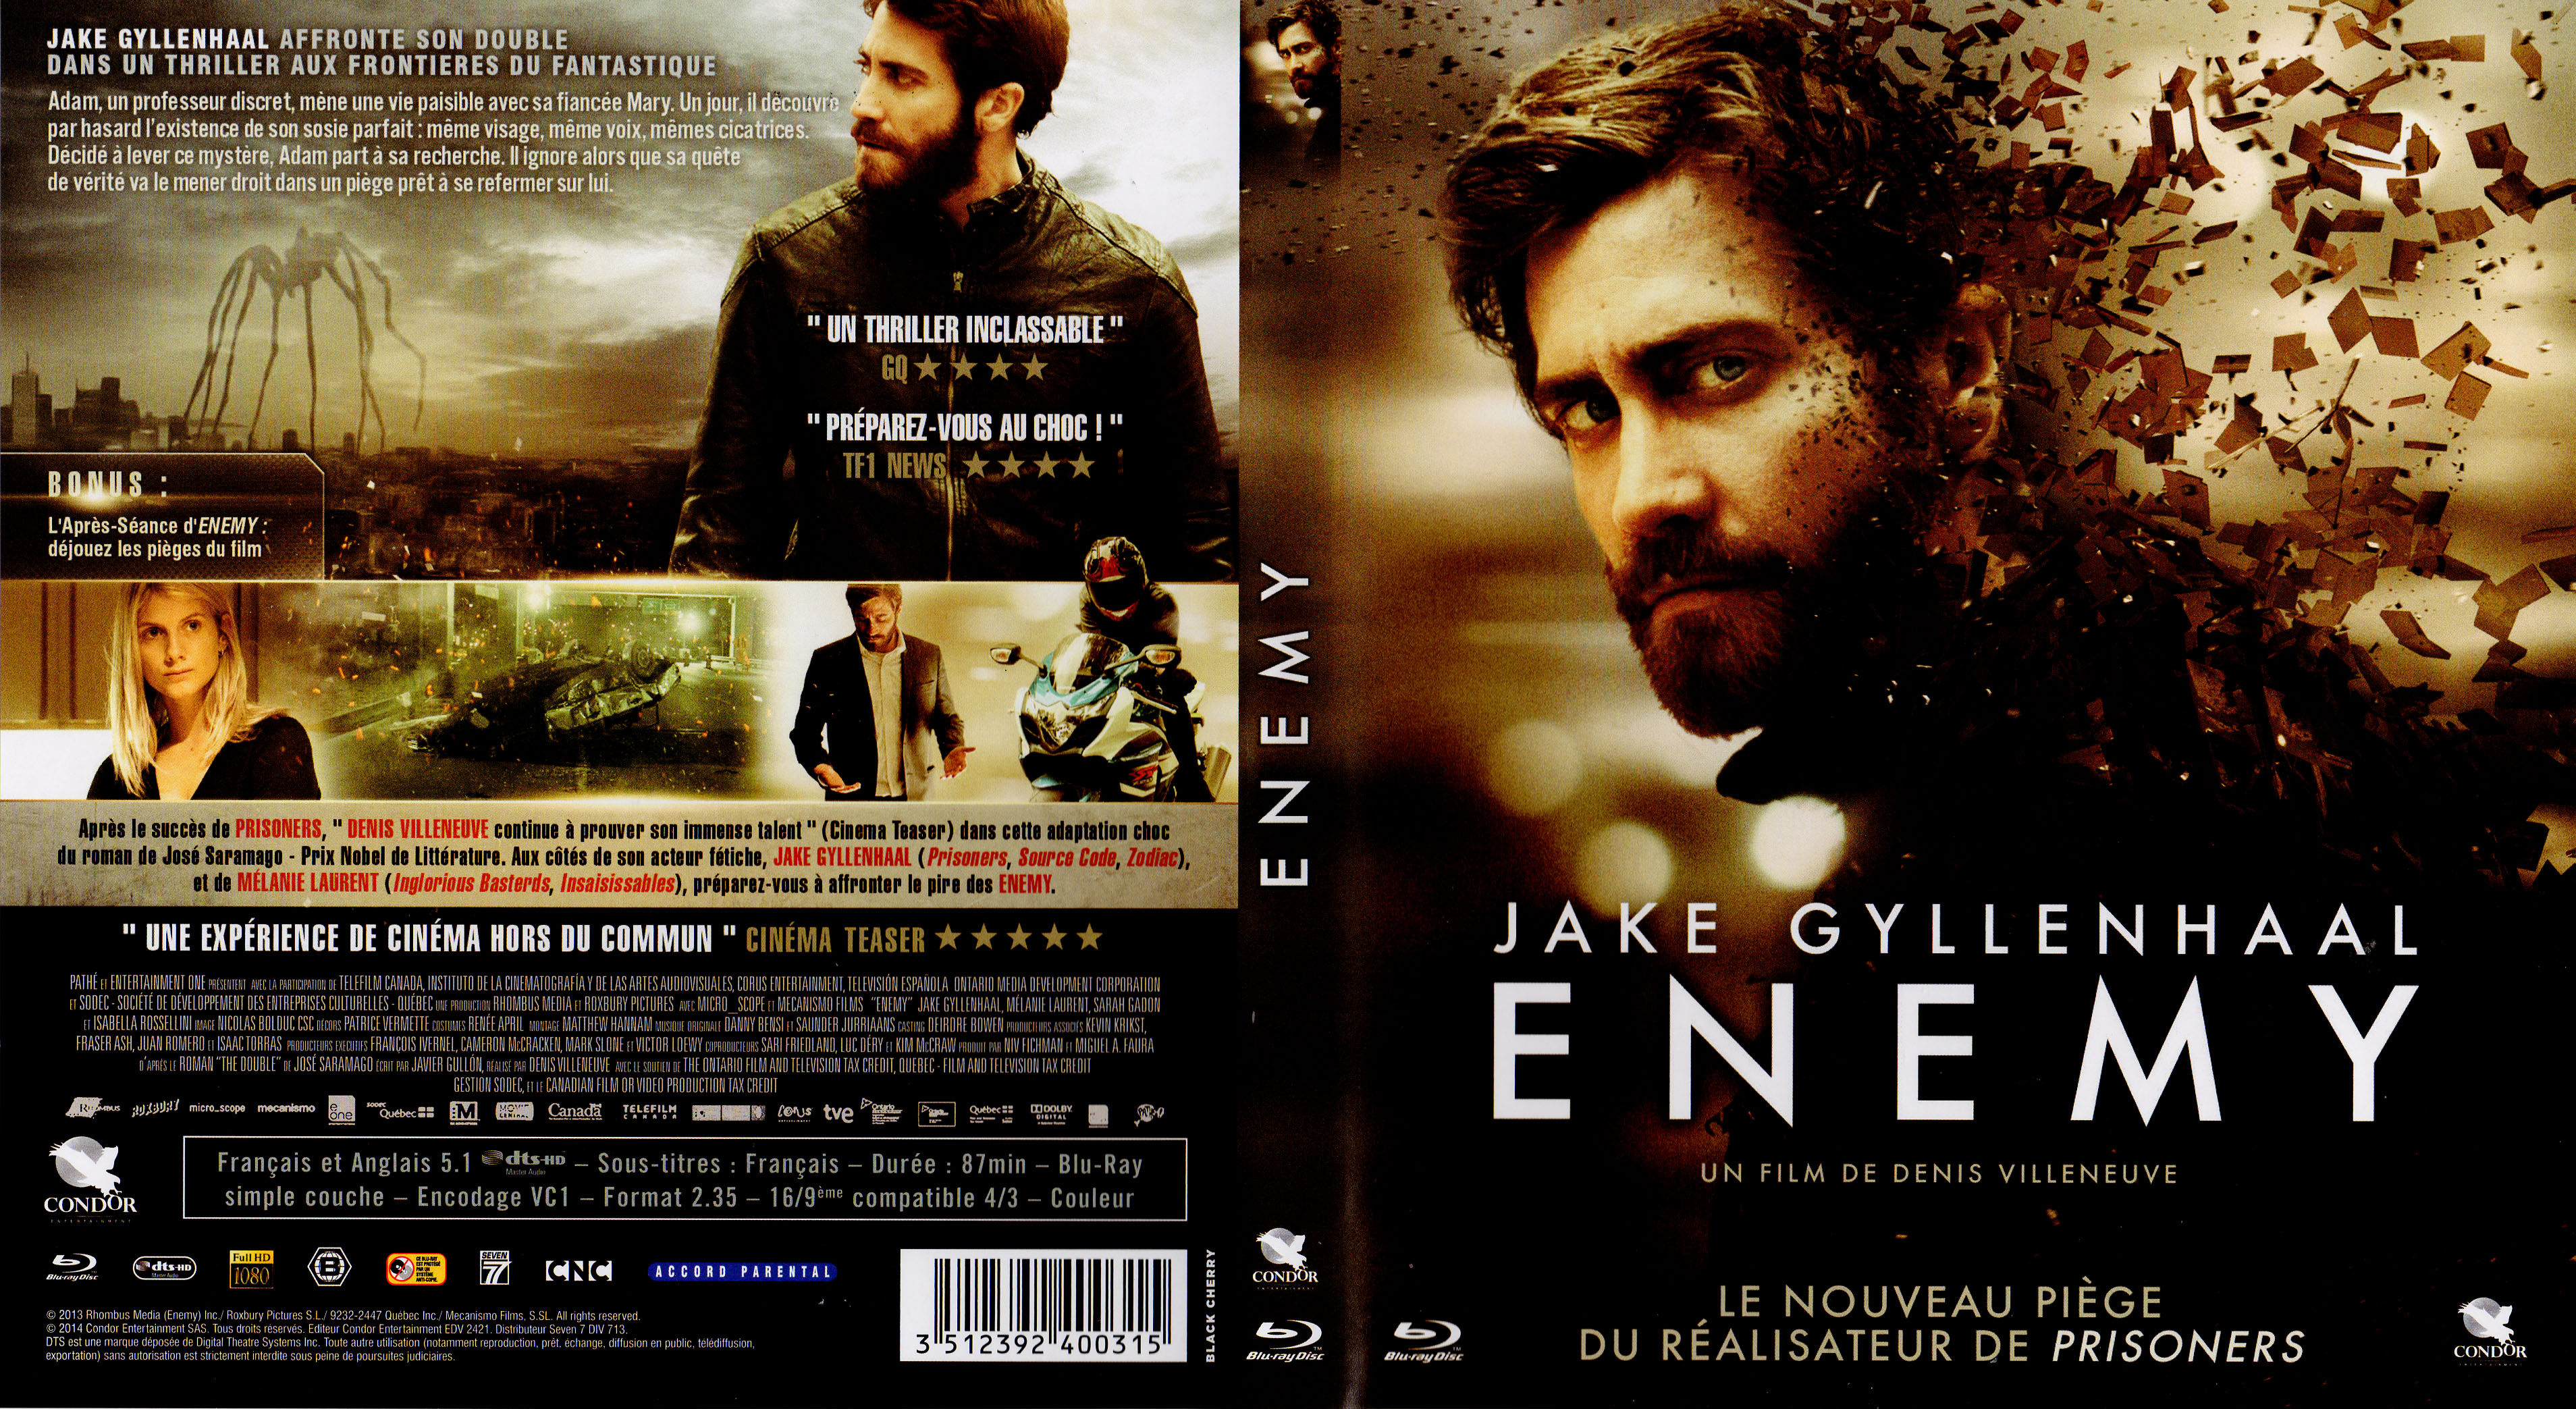 Jaquette DVD Enemy (BLU-RAY)